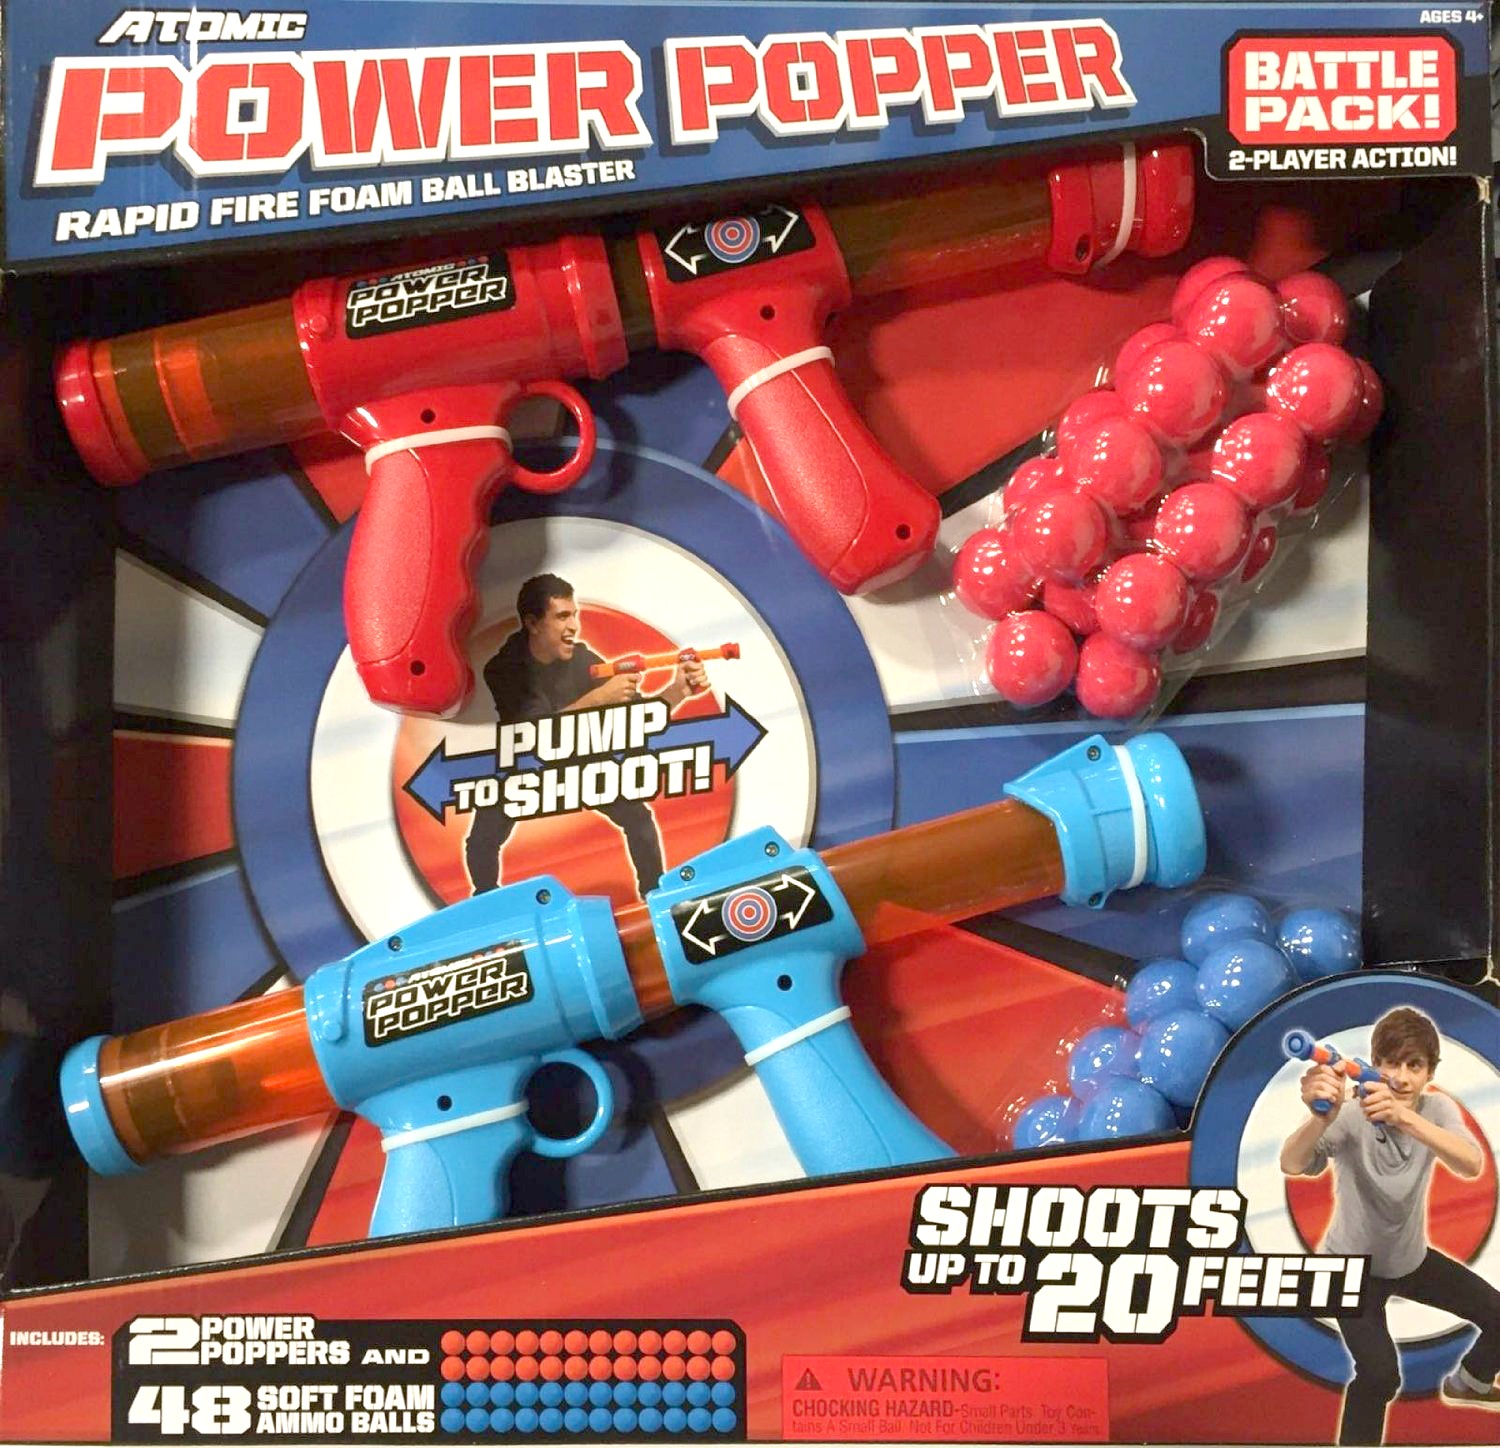 Looking for Indoor Fun? Atomic Soft Foam Power Poppers!